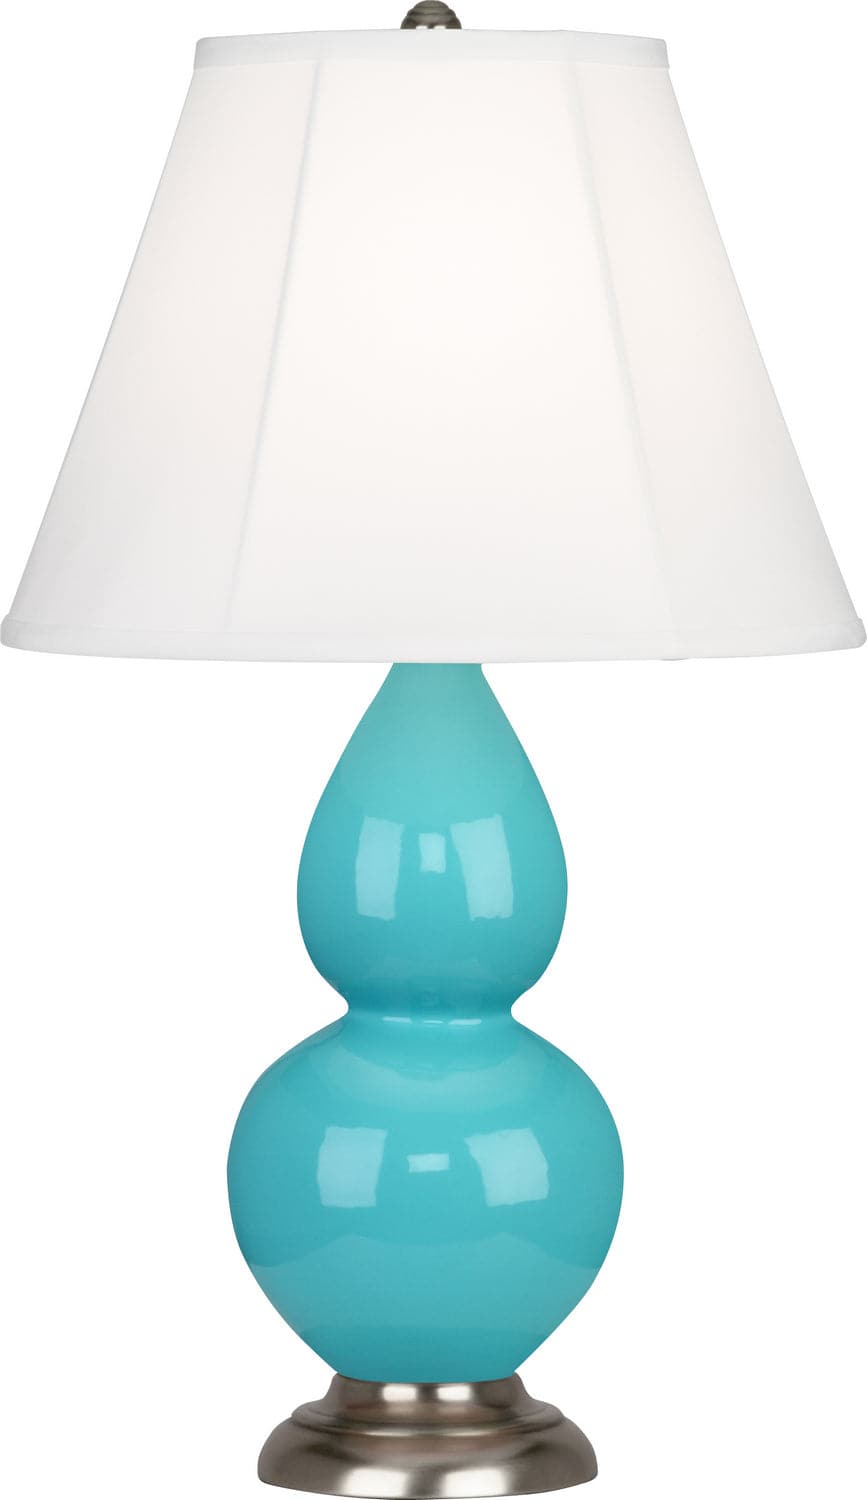 Robert Abbey - 1761 - One Light Accent Lamp - Small Double Gourd - Egg Blue Glazed